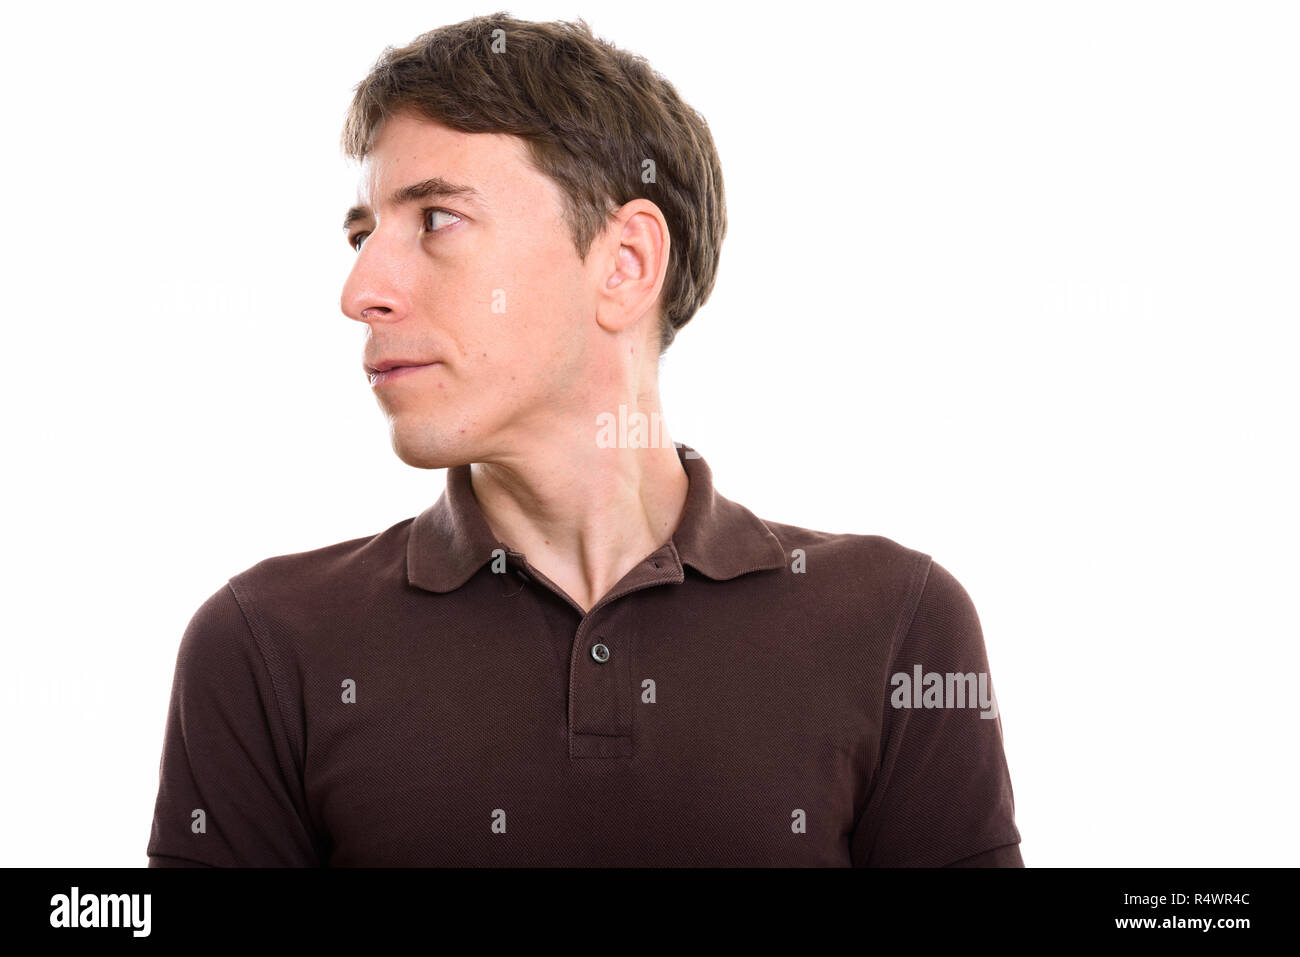 Studio shot of man looking away against white background Stock Photo